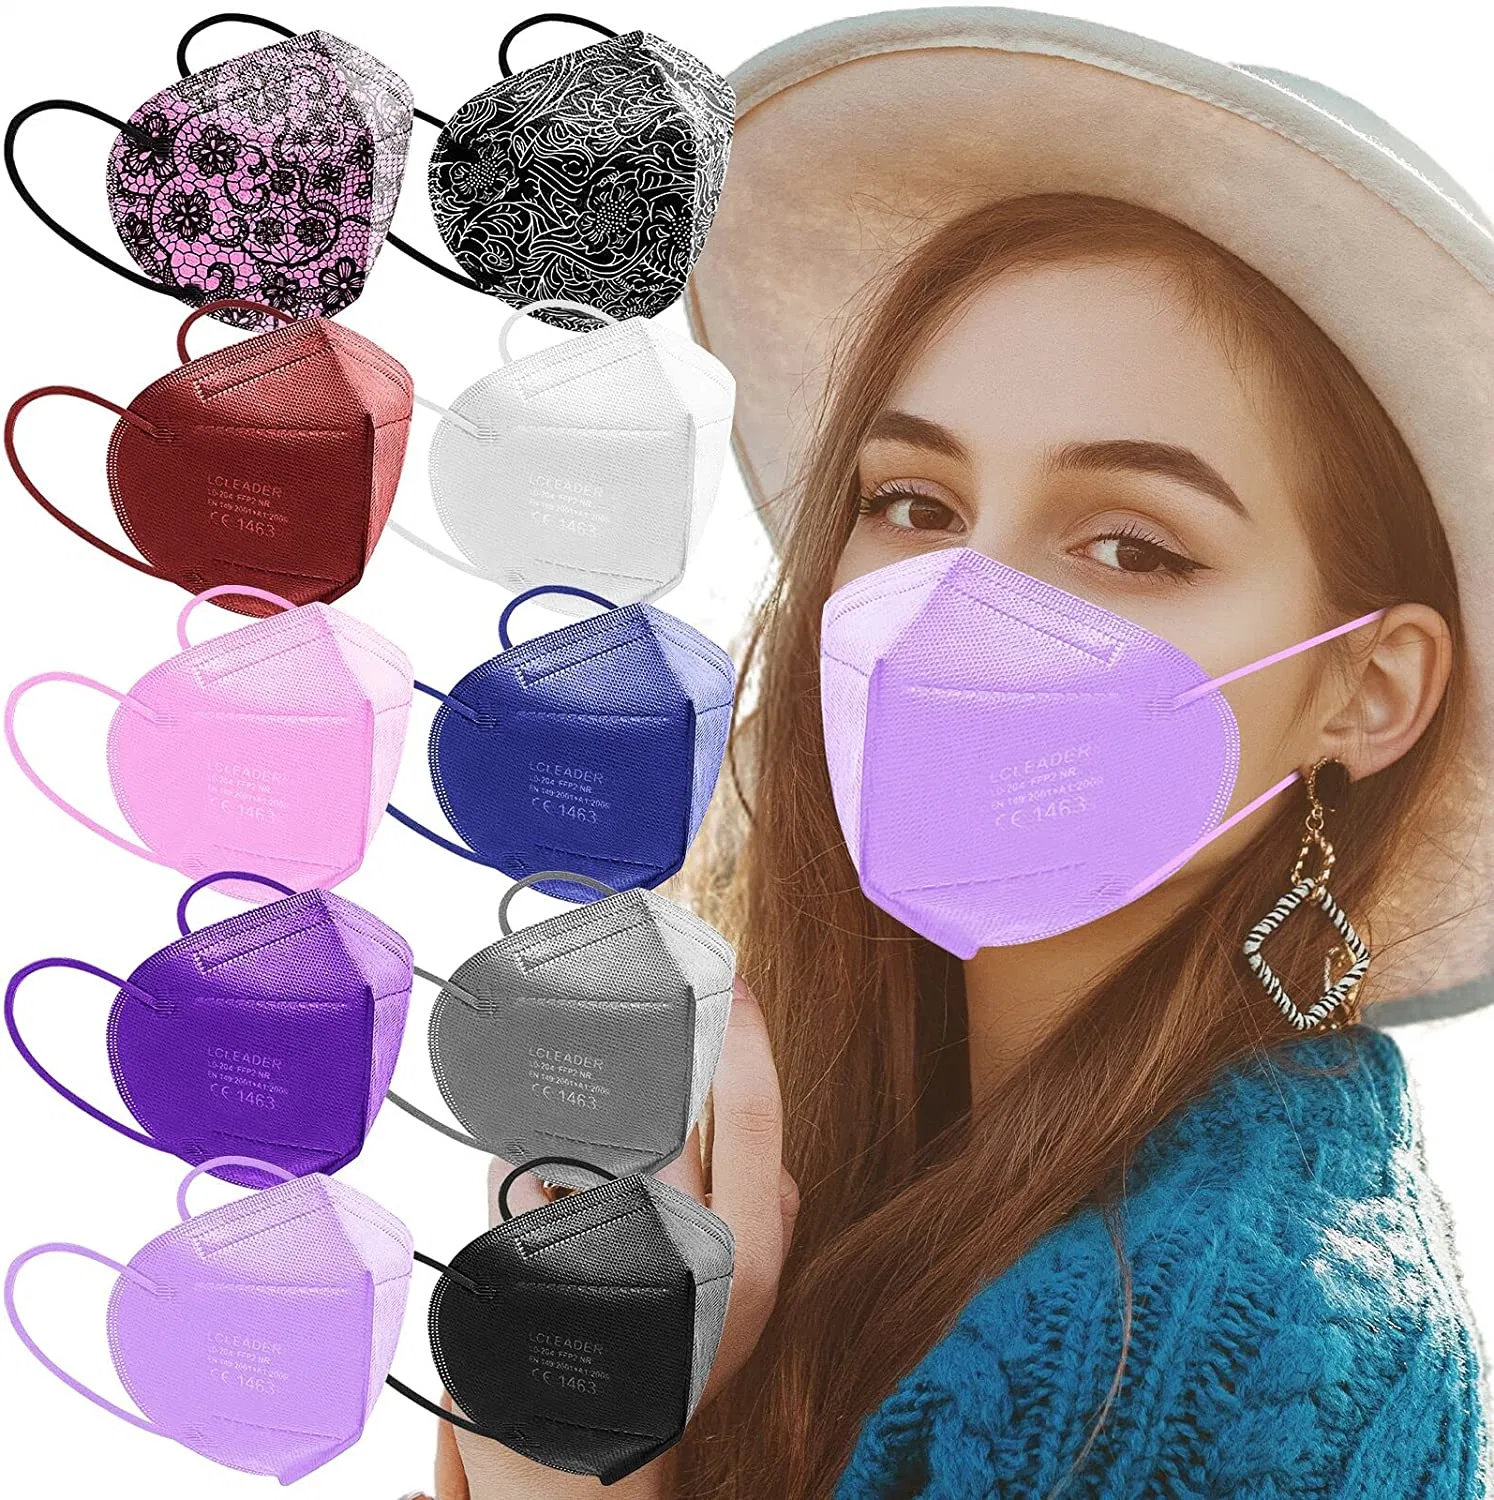 KN95 Face Mask Individually Wrapped KN95 Mask 5 Layer Breathable Colorful KN95 Masks with Design